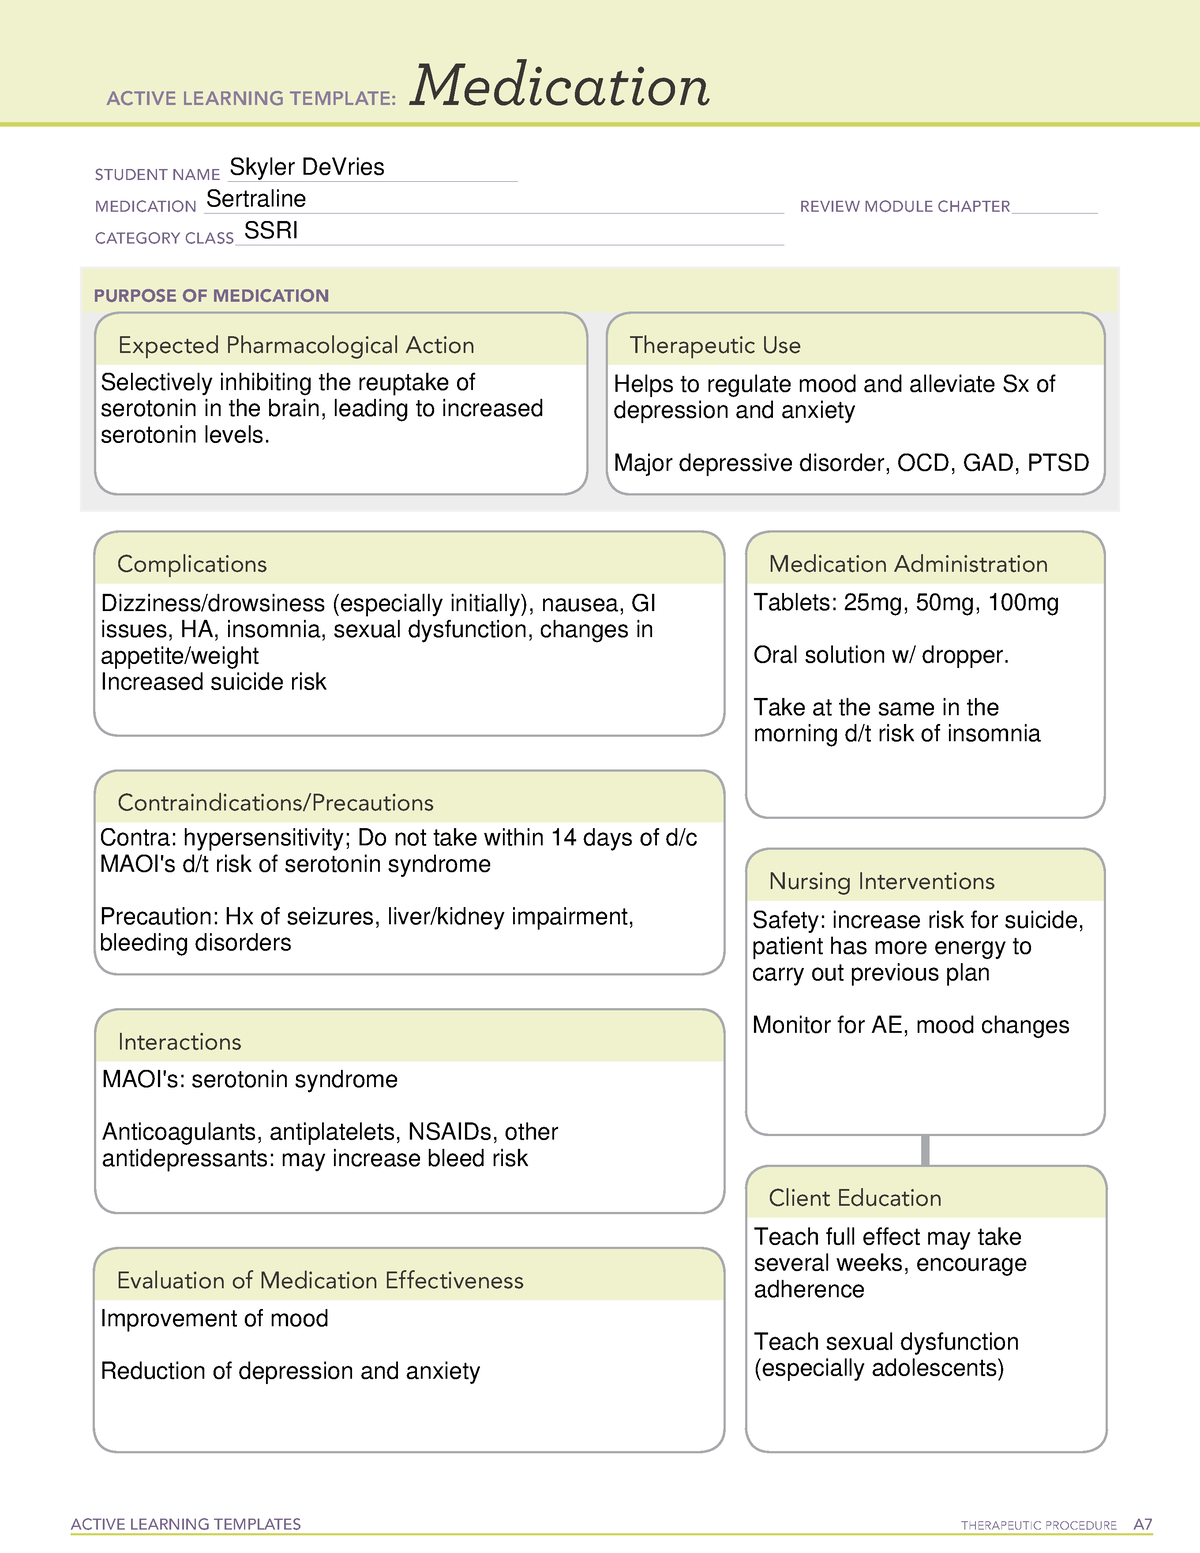 med-sheet-sertraline-active-learning-templates-therapeutic-procedure